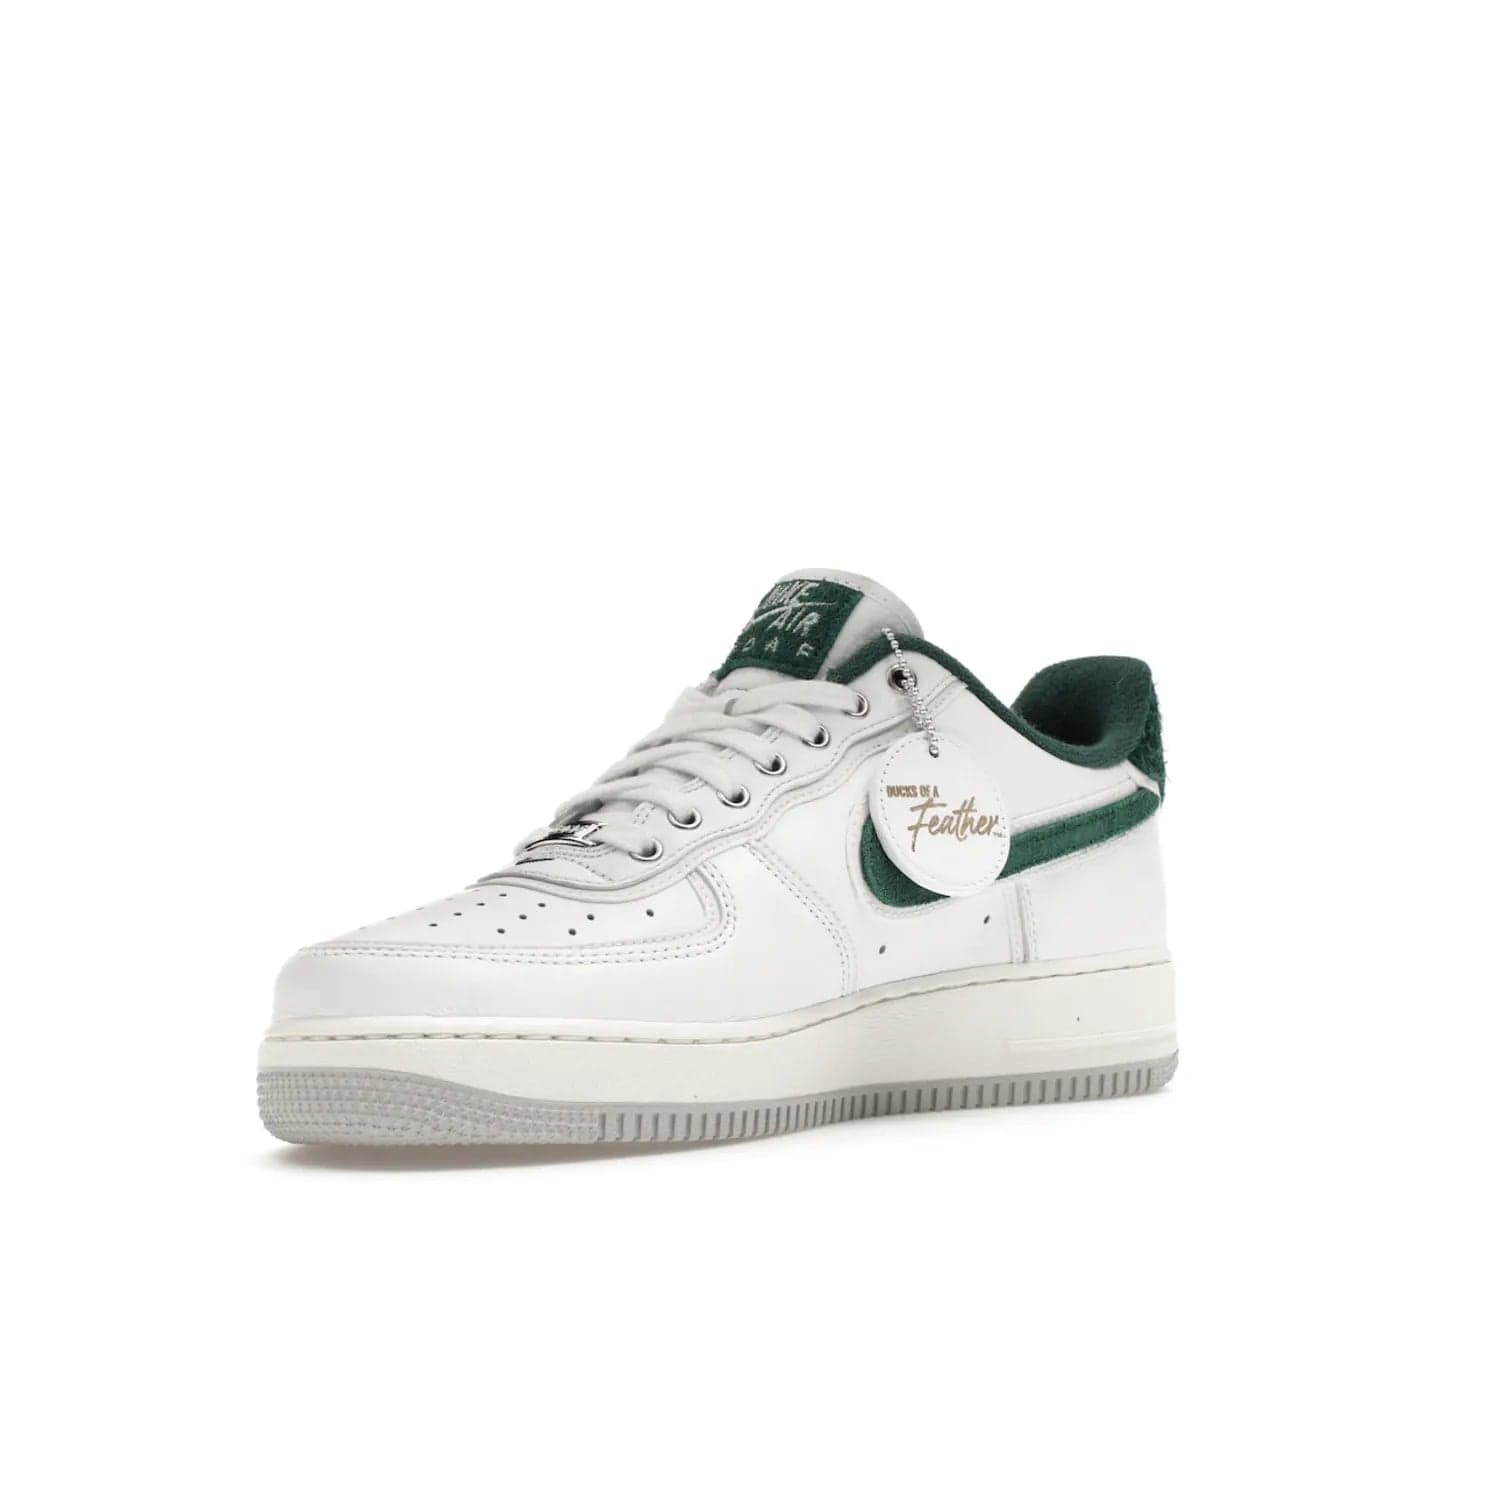 Nike Air Force 1 Low '07 Premium University of Oregon PE - Image 15 - Only at www.BallersClubKickz.com - The Nike Air Force 1 Low '07 Premium. Special Oregon University colorway. White base with green and sail accents. Cushioned rubber midsole. Comfort and style. Support your school!